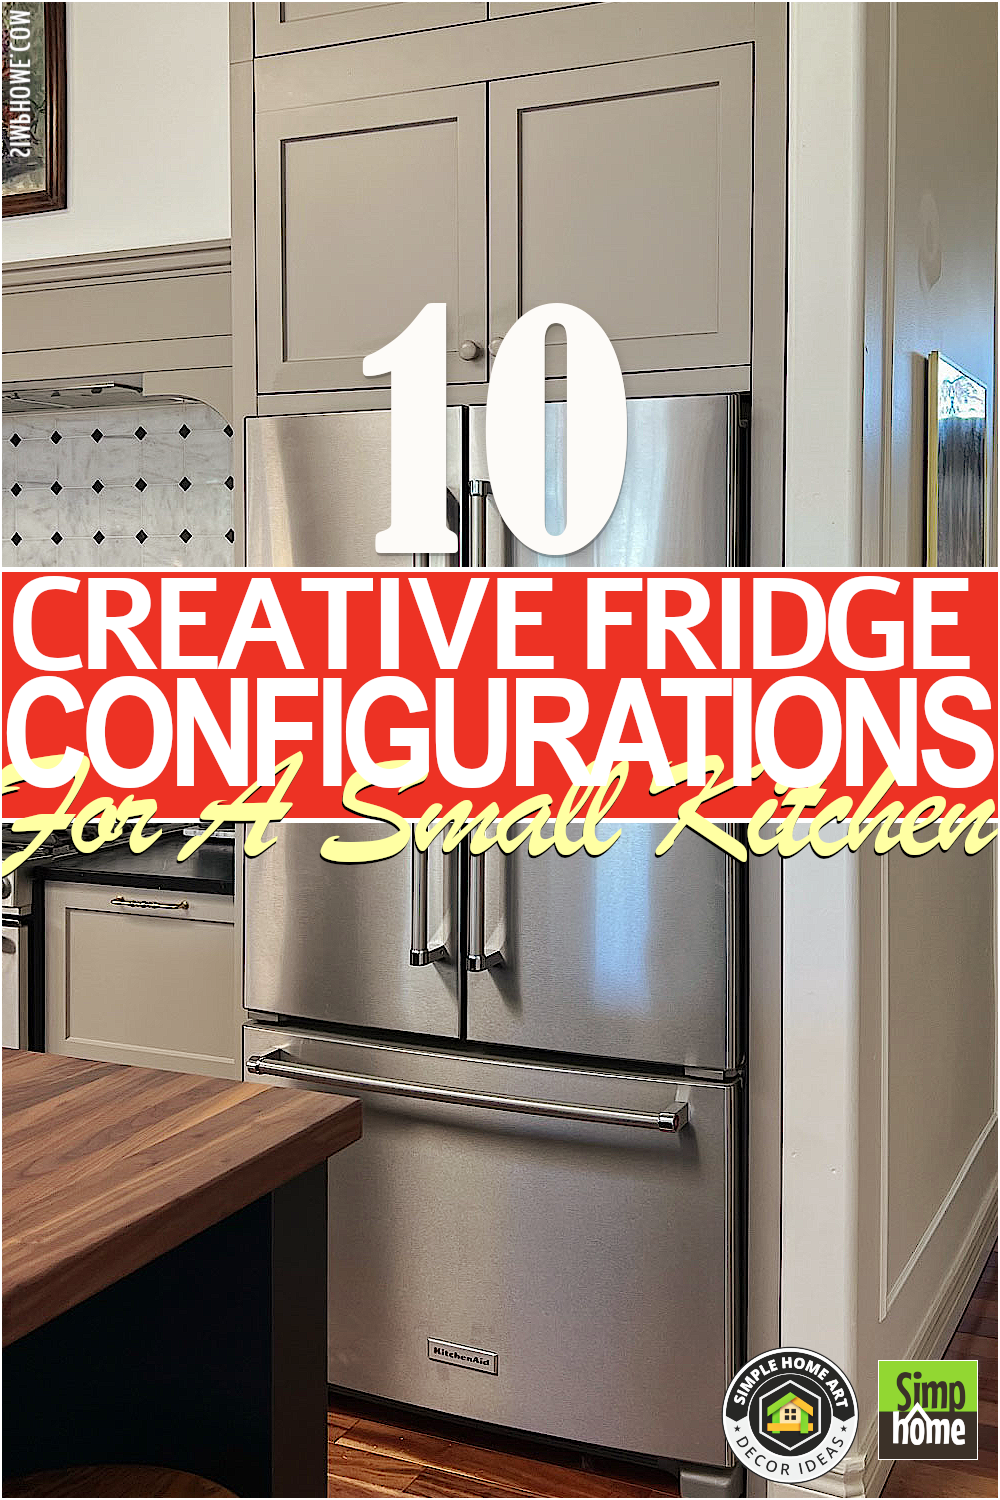 fridge configurations for small kitchens